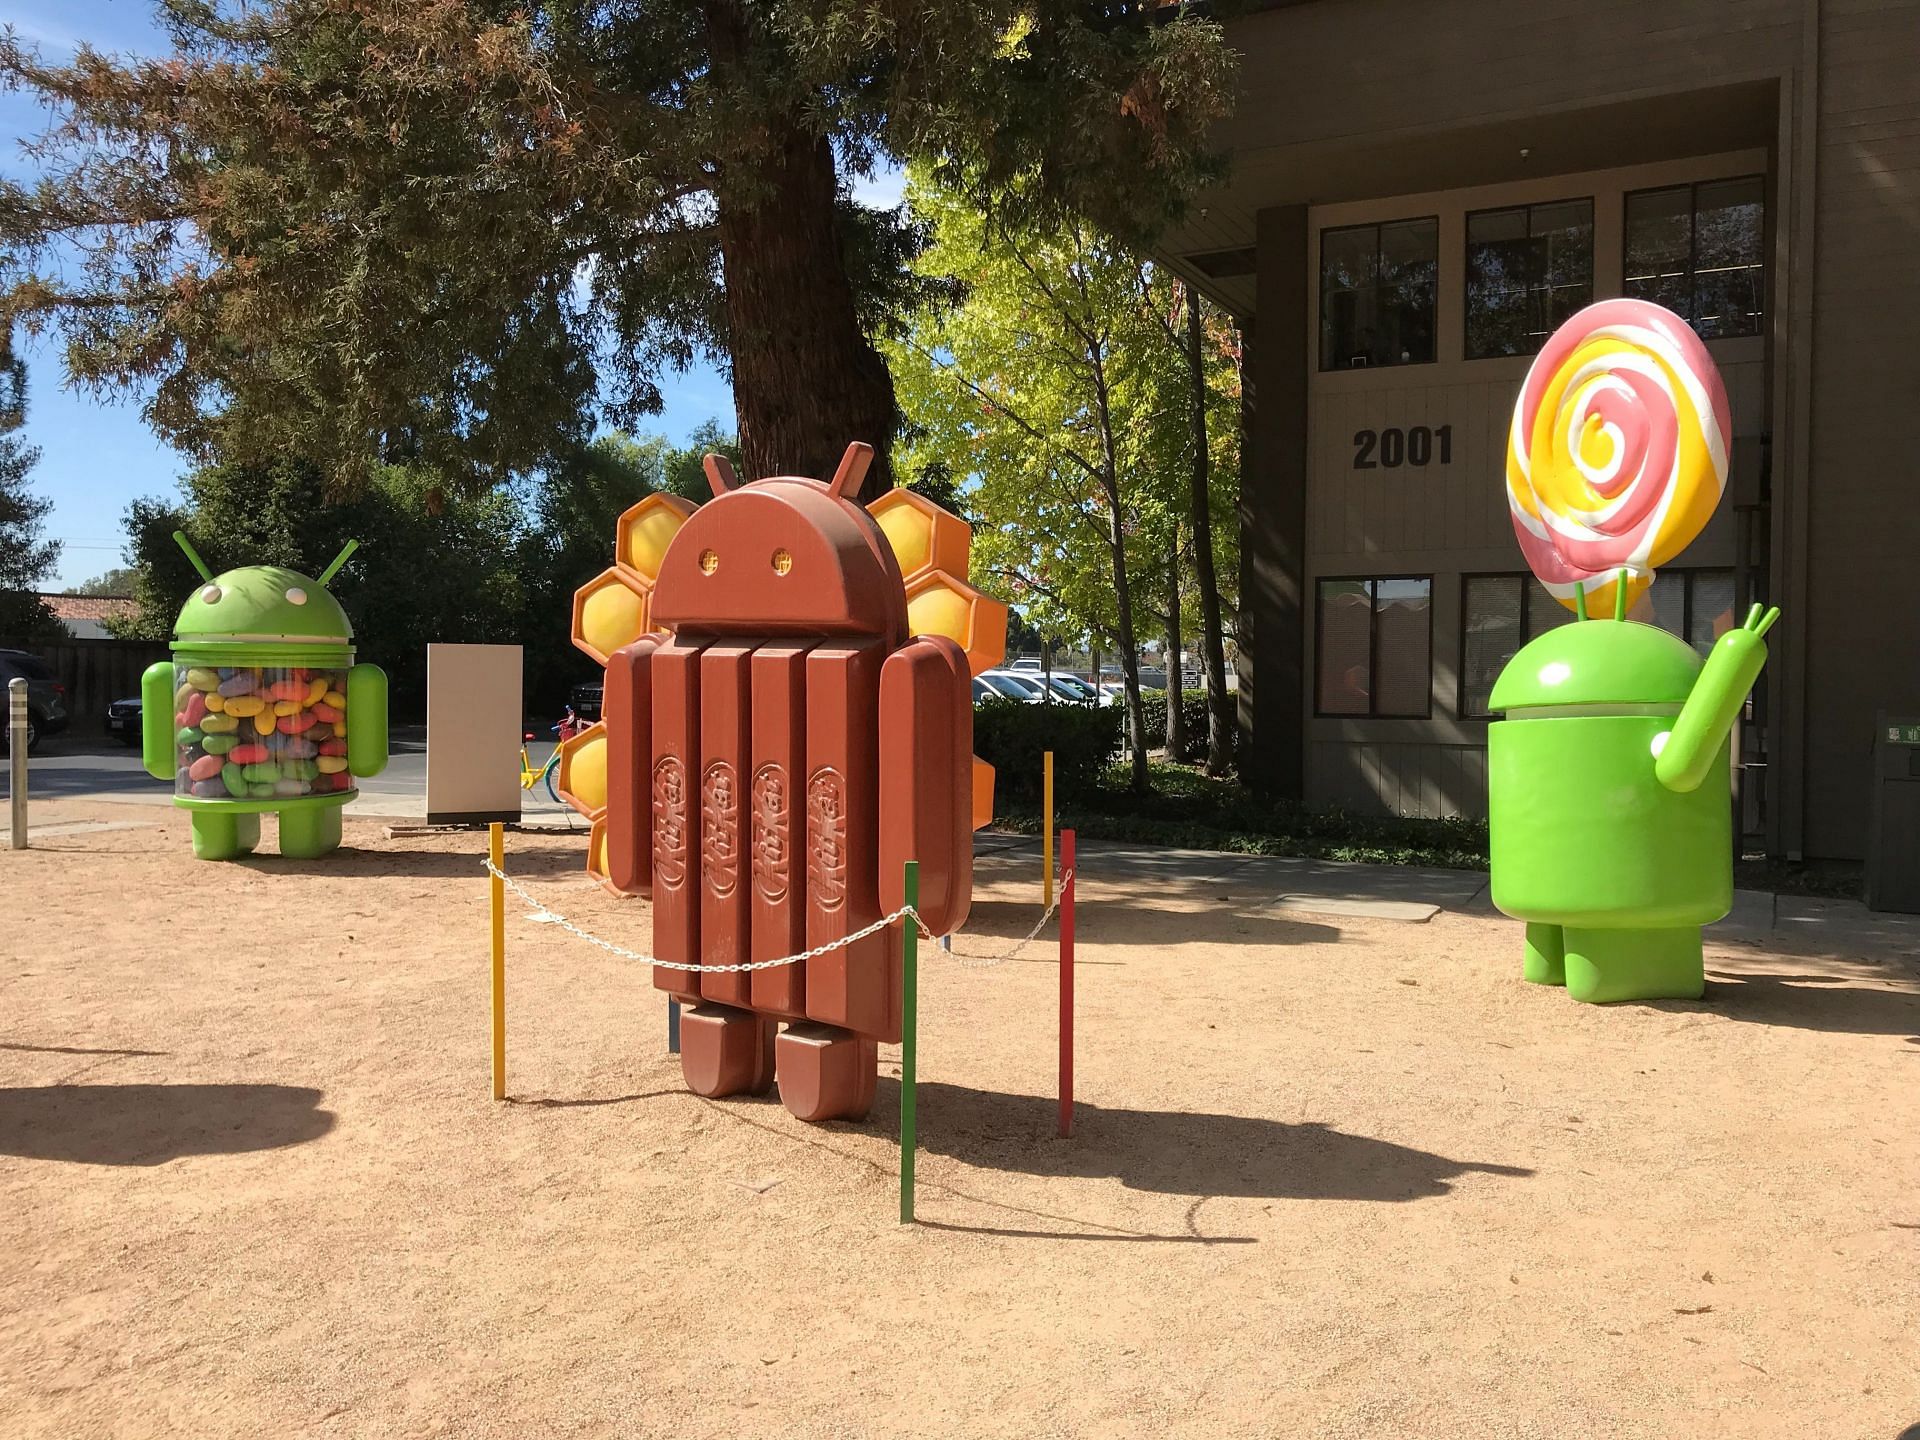 Latest version of Android may arrive sooner than expected (Image via Guido Coppa/Unsplash)